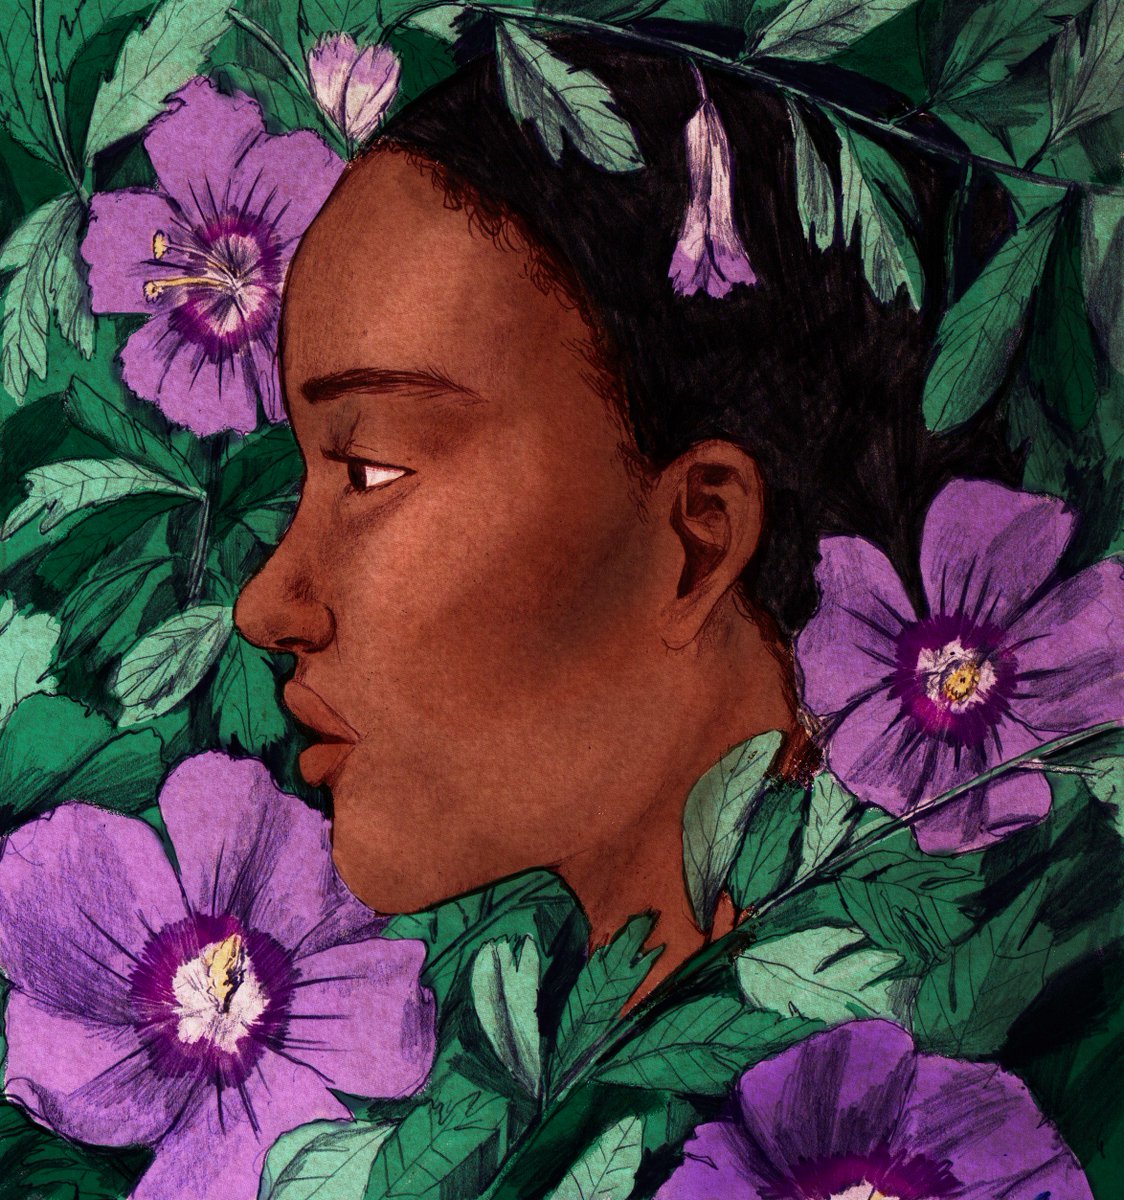 Lizzy Stewart on X: My next book image is for Purple Hibiscus by